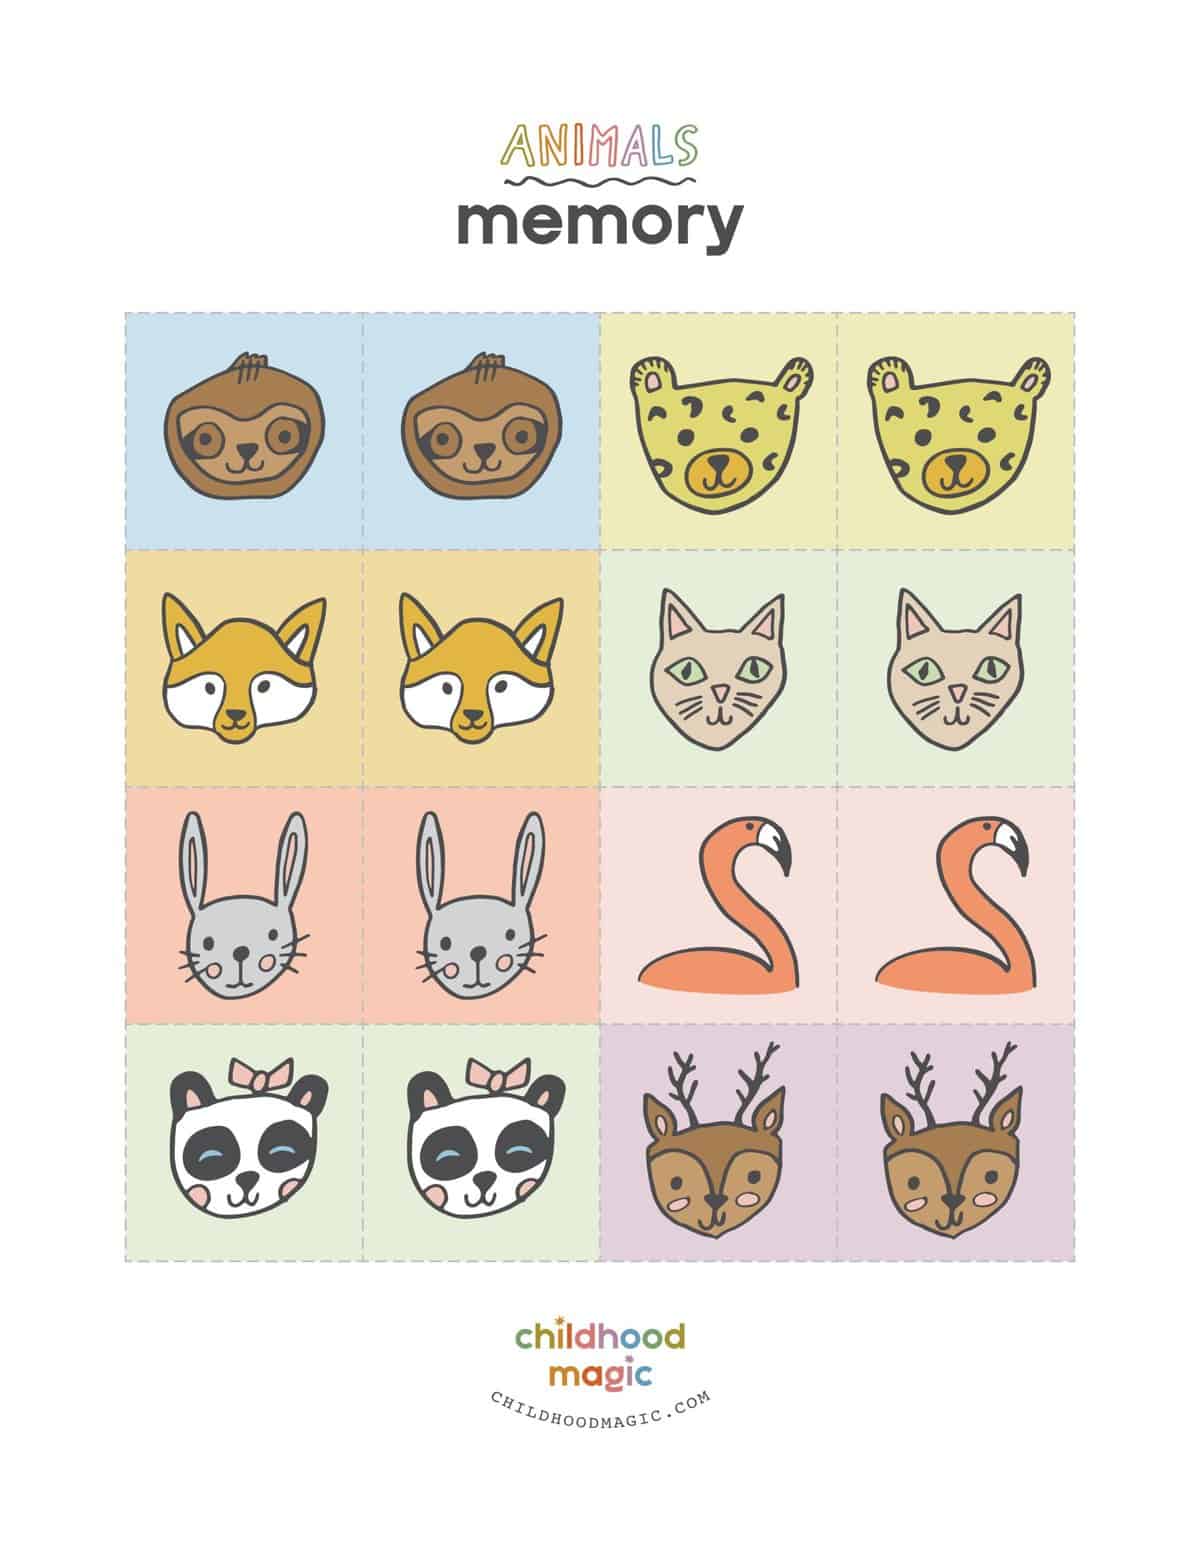 Matching game Kids - cute Animals animated GIFs - Online, Free